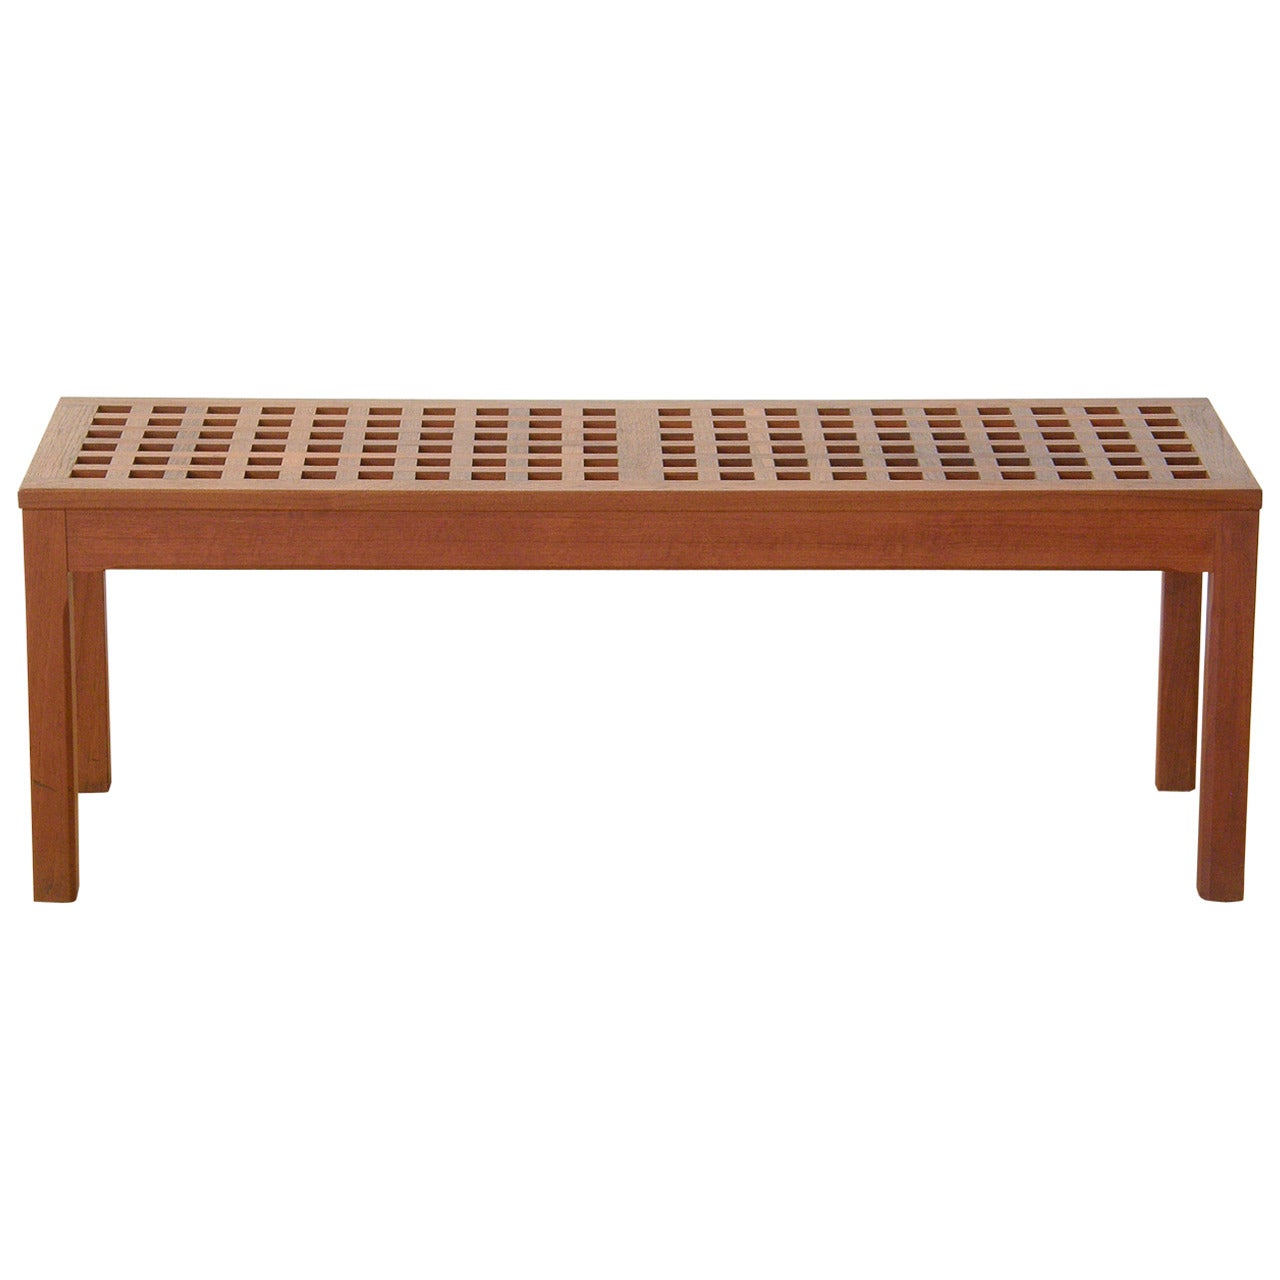 Rectangular Teak Grid Top Coffee Cocktail Table or Bench